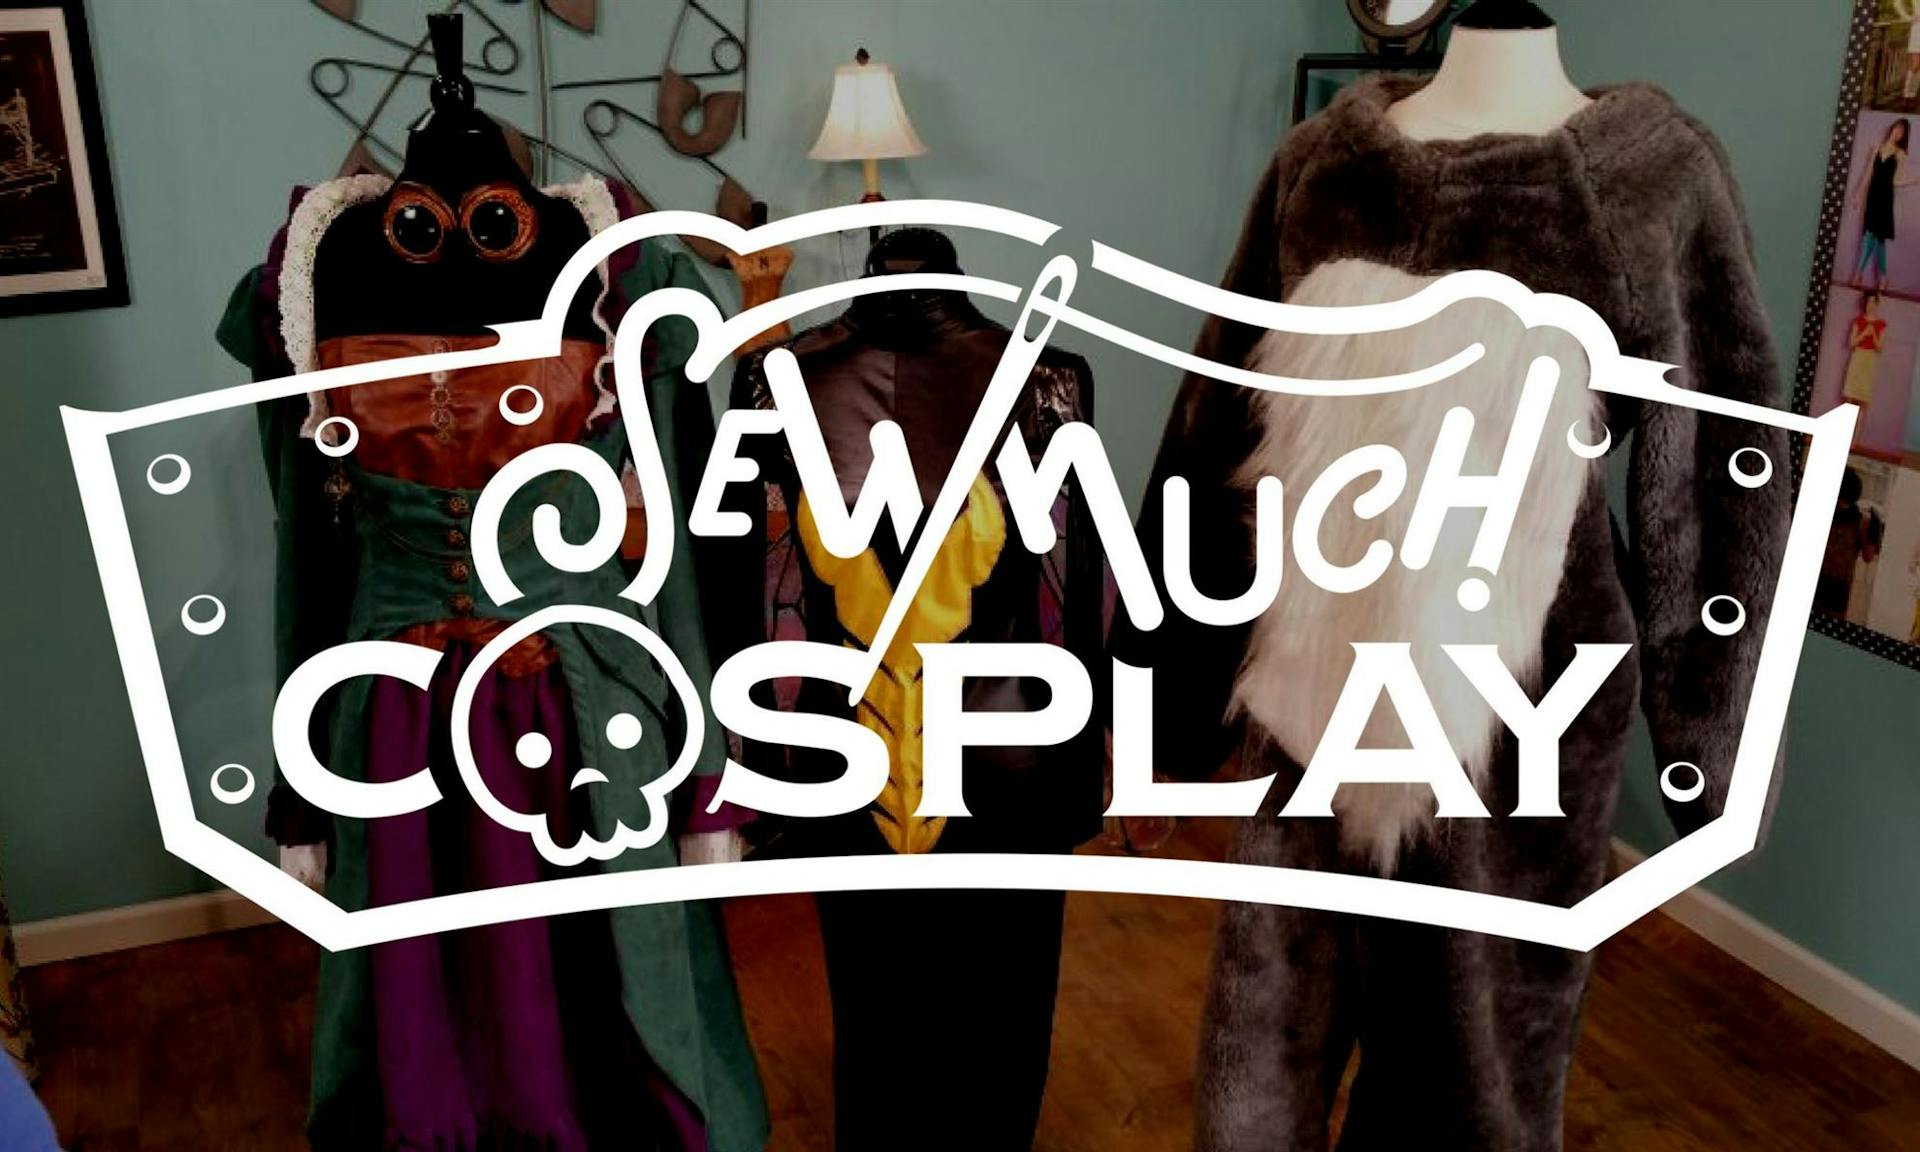 logo for sew much cosplay